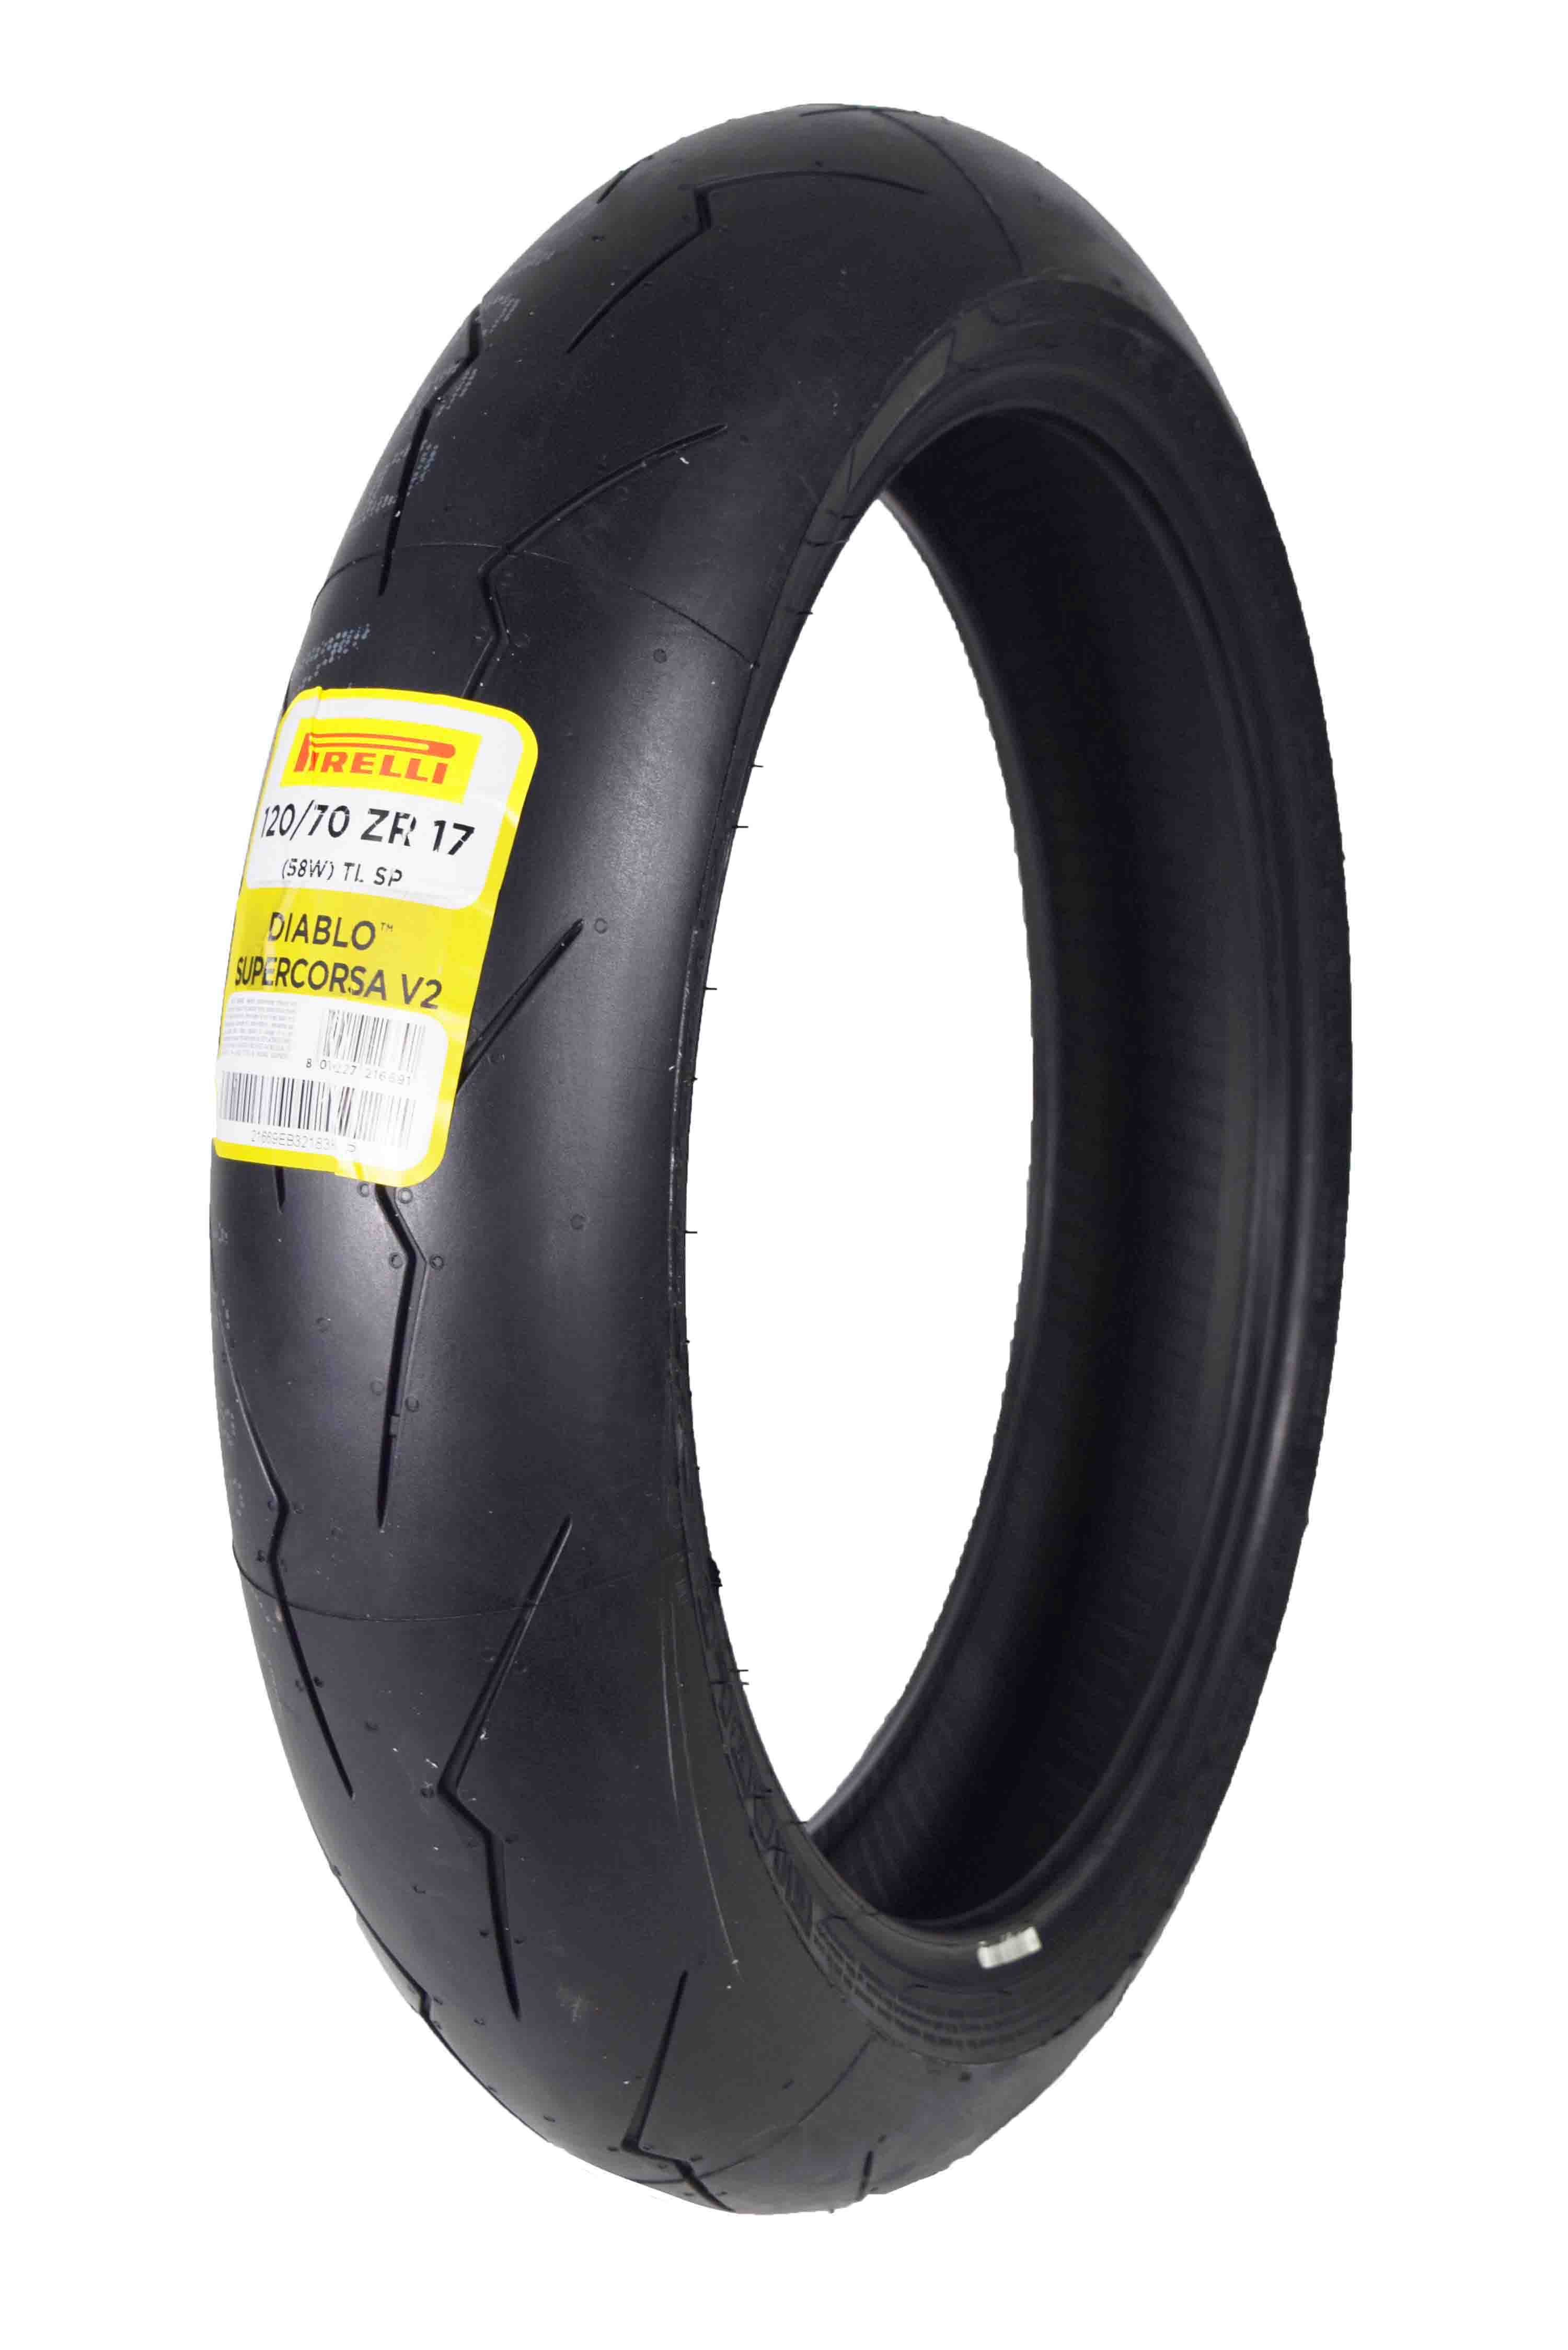 Pirelli Tire 120/70ZR17 SUPER CORSA V2 Radial Motorcycle Front Tire 12 ...